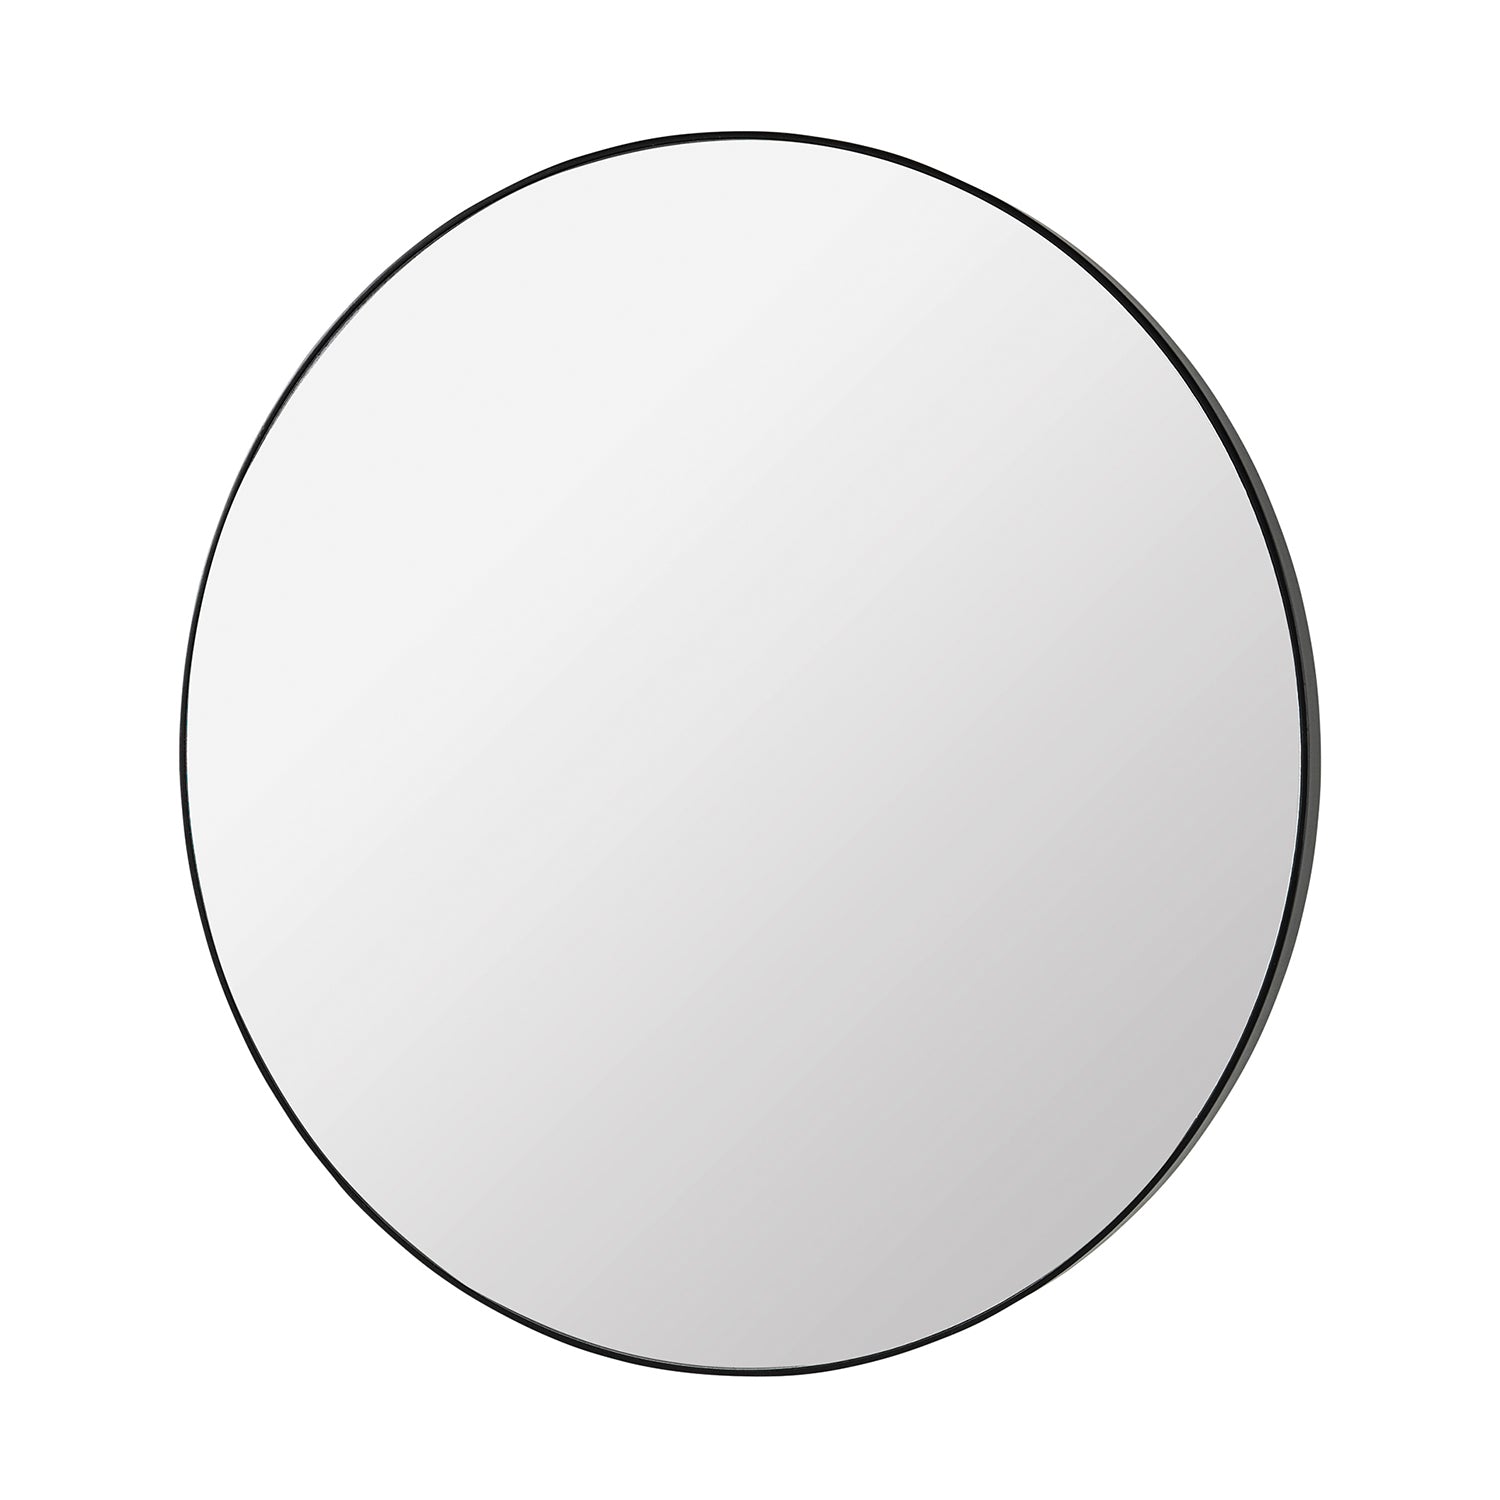 Complete Mirror - The Design Choice